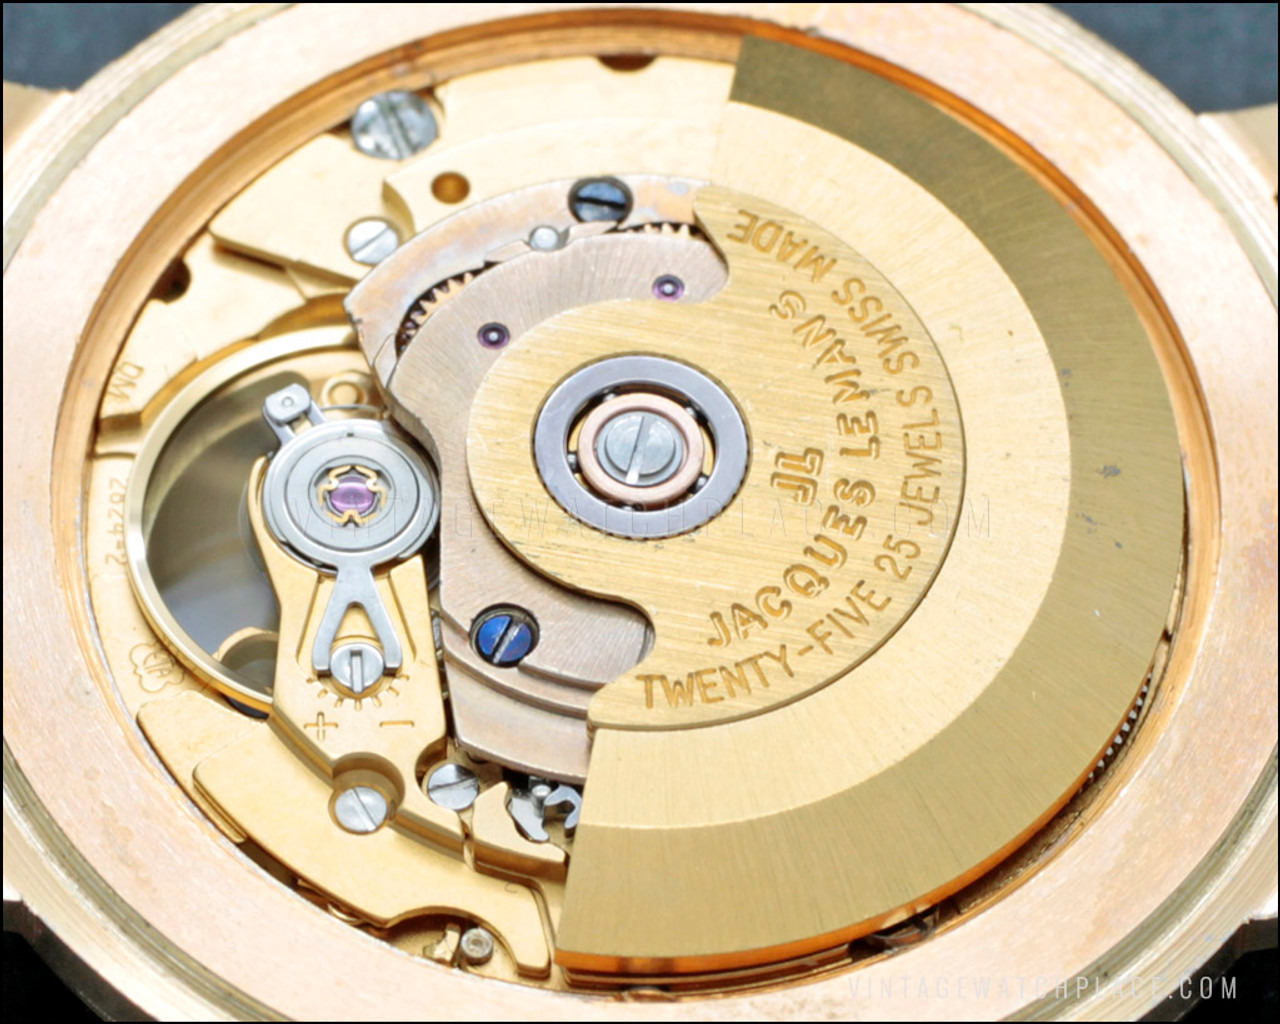 Swiss made Jacques dial, Marriage vintage Hi golden See 2824-2 watch, through ETA Beat mechanical dial, all plated Lemans gold movement